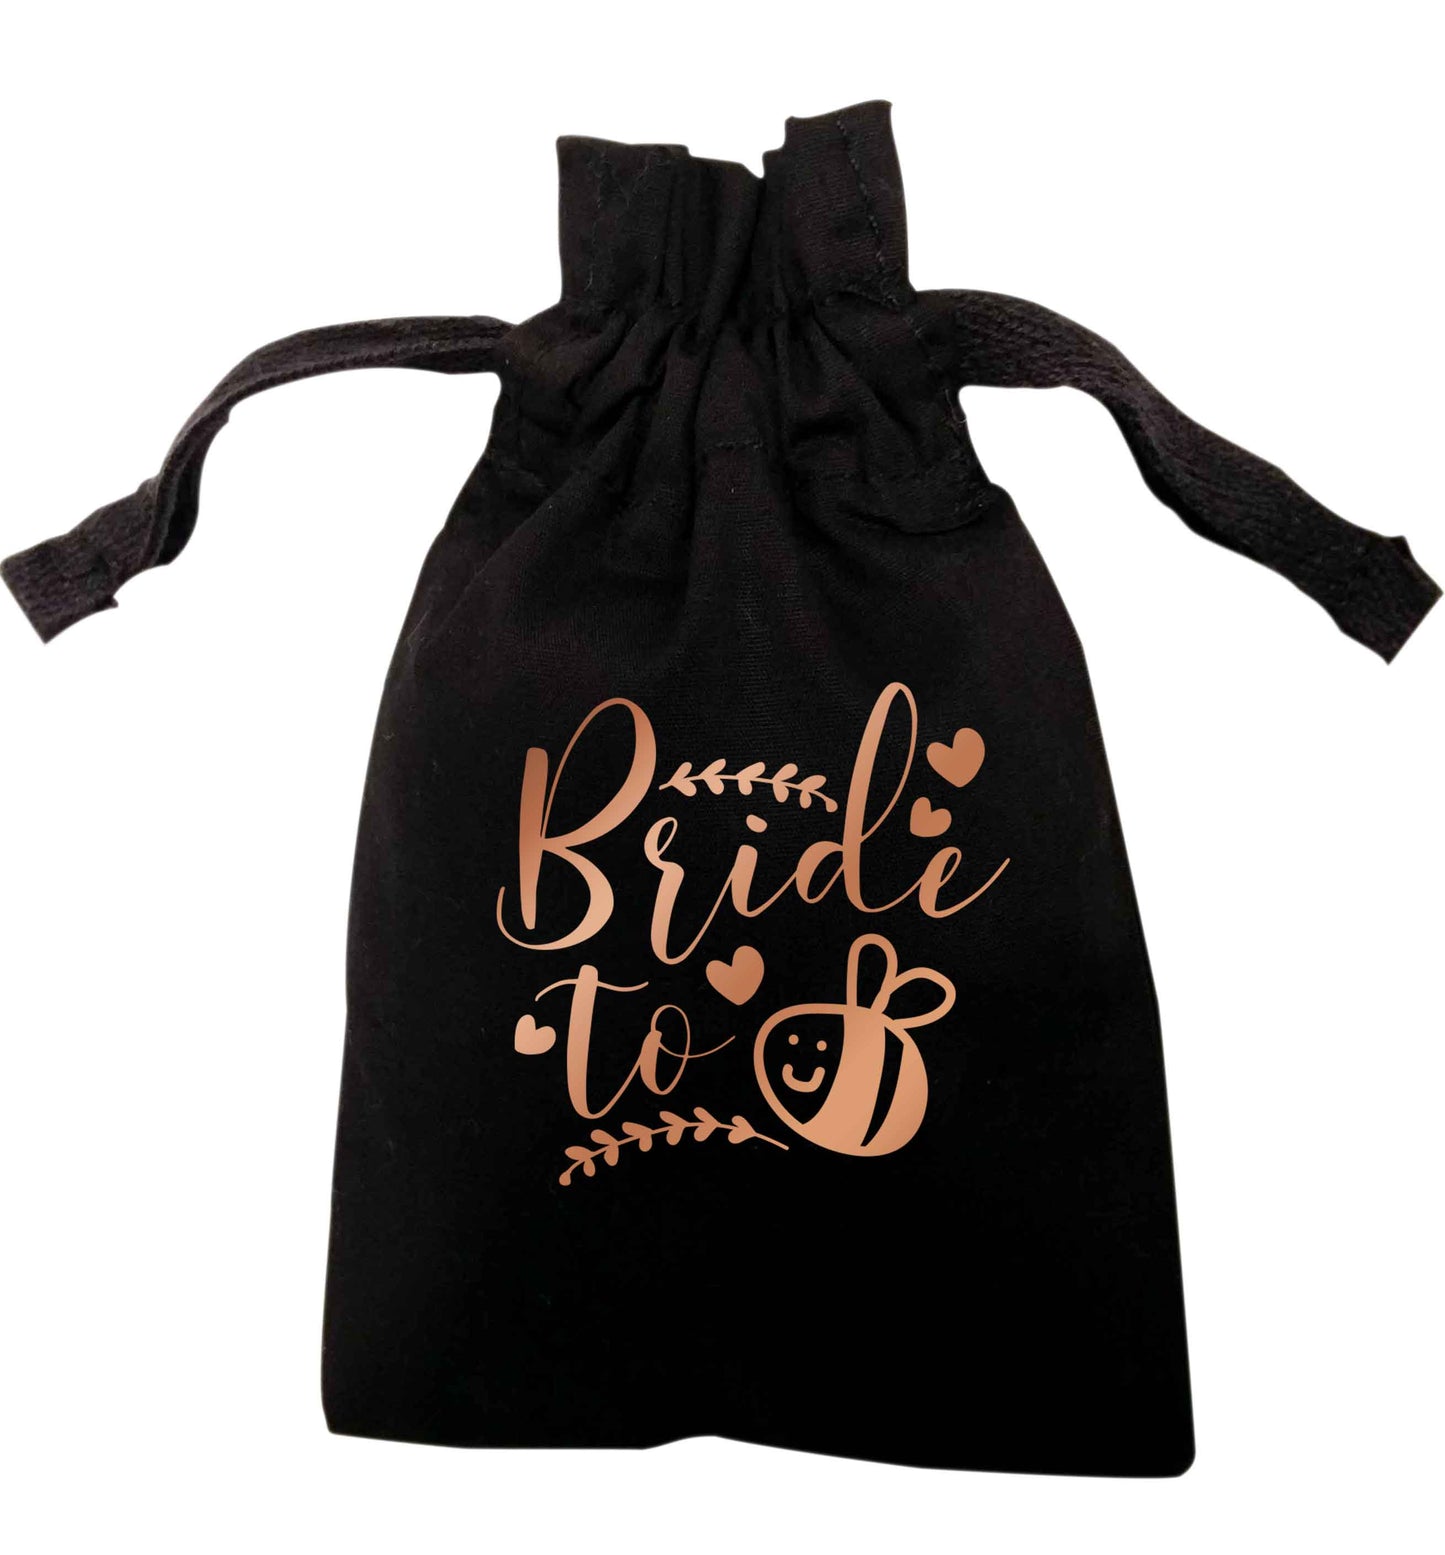 Rose gold bride to bee | XS - L | Pouch / Drawstring bag / Sack | Organic Cotton | Bulk discounts available!